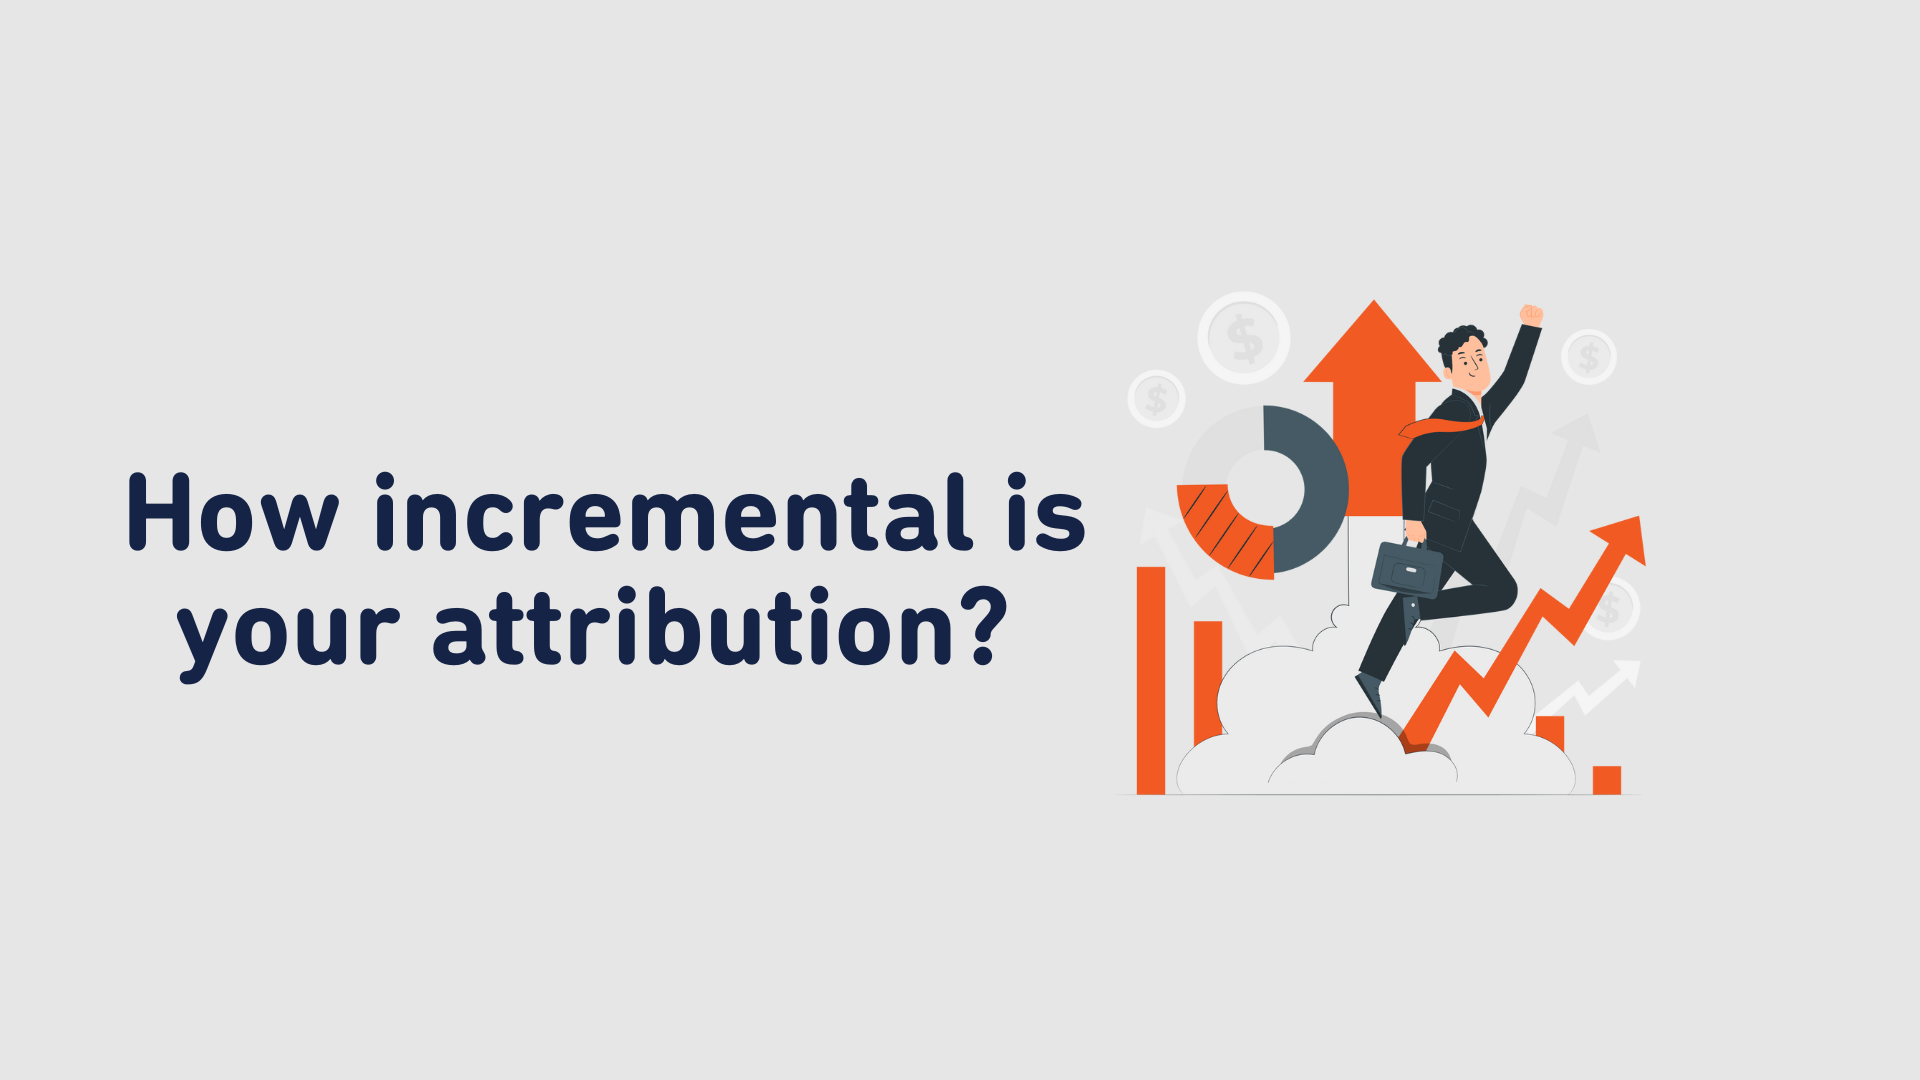 How incremental is your attribution?